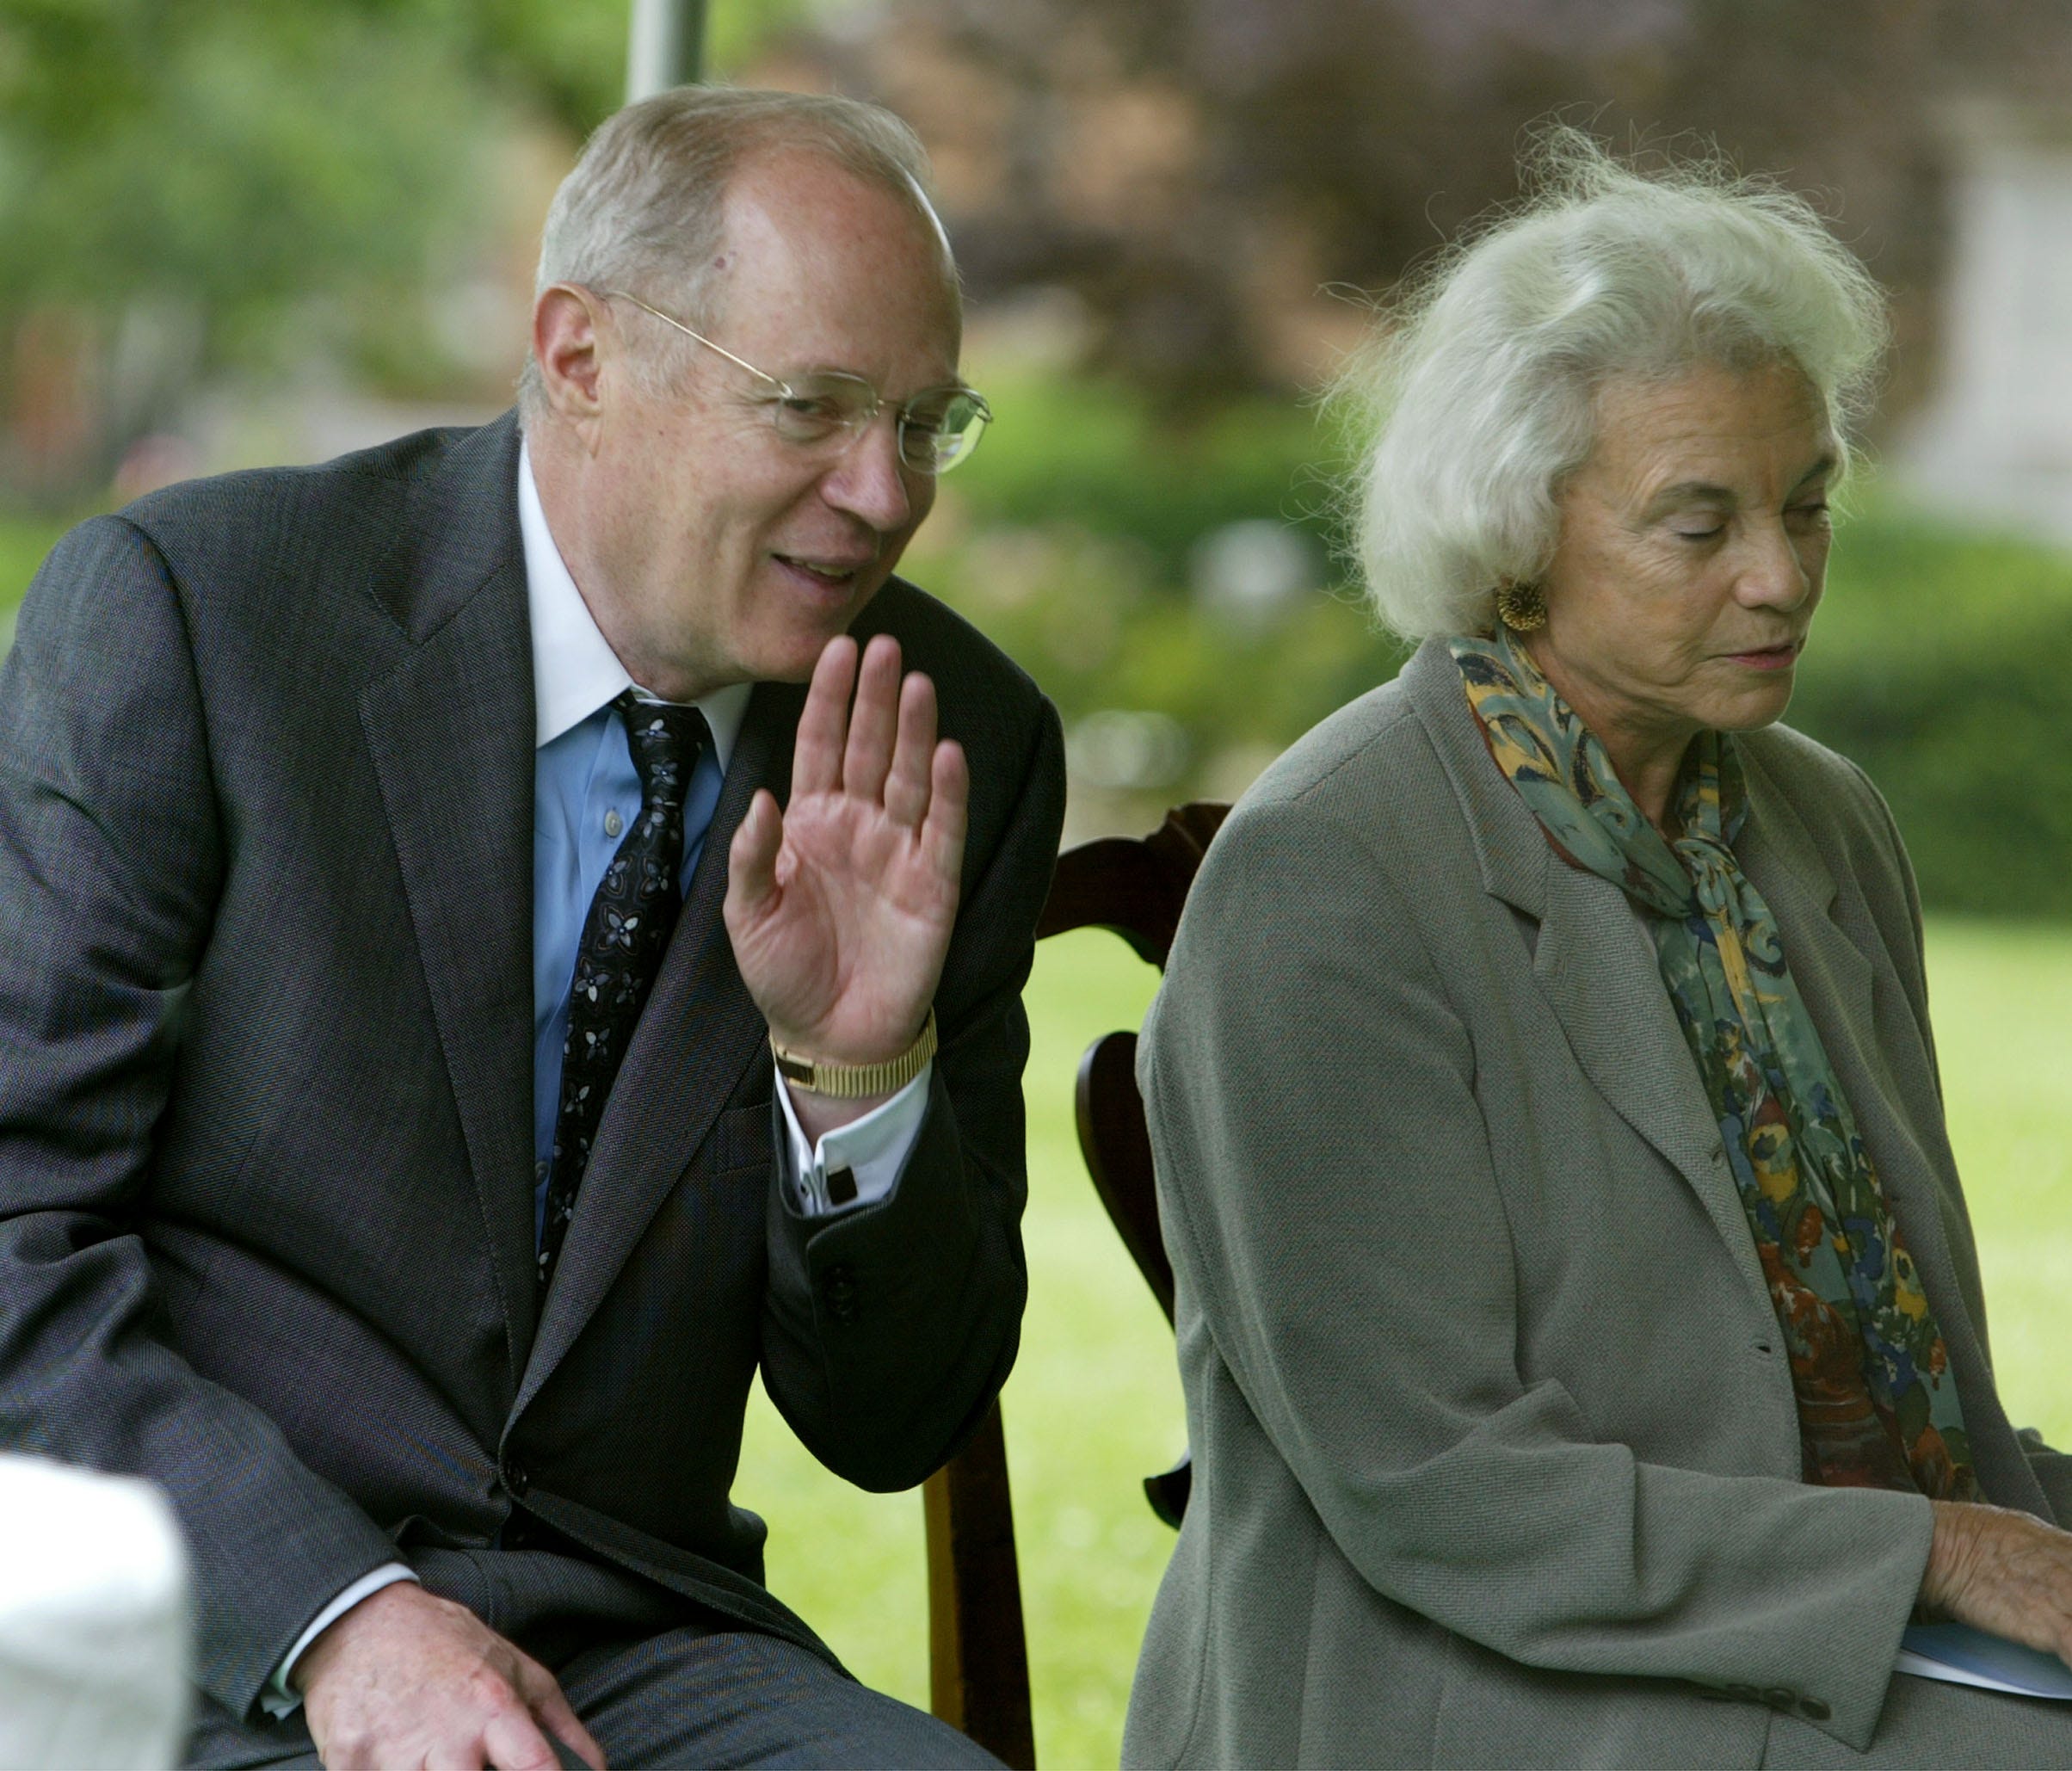 Supreme Court Justice Anthony Kennedy whispers to Justice Sandra Day O'Connor during a groundbreaking ceremony at the court in 2003.